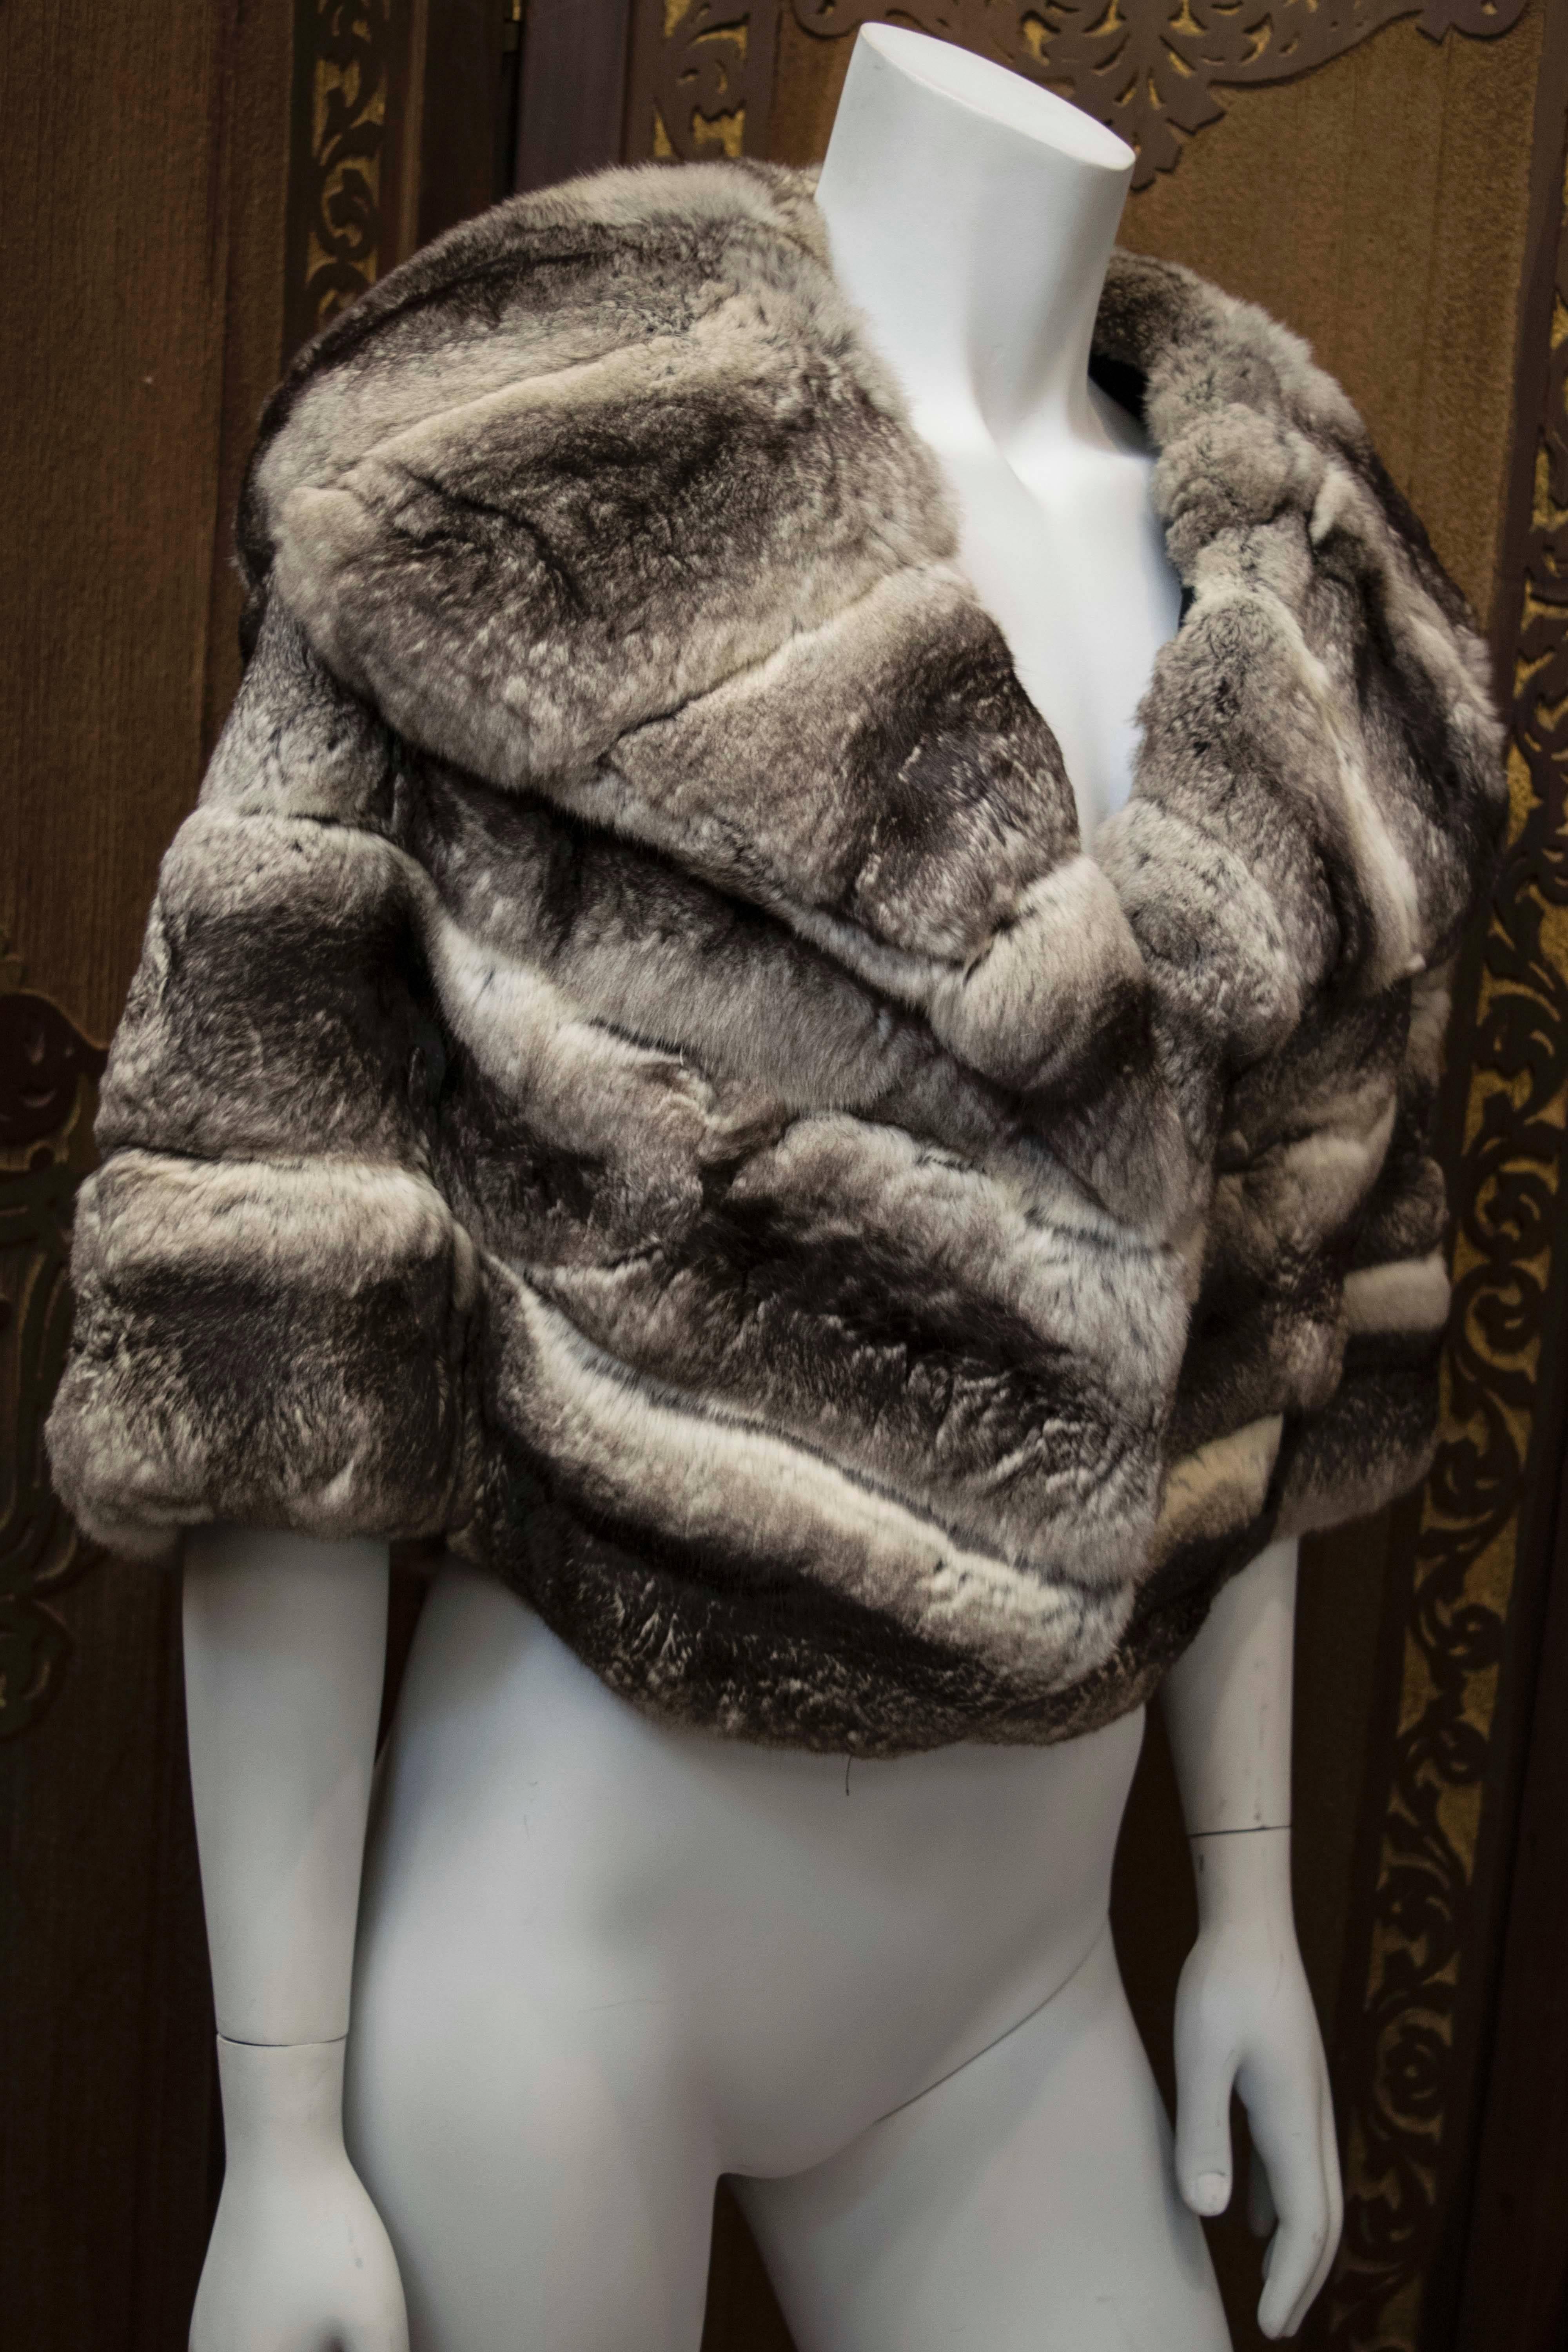 1960s Chinchilla Fur Stole.
 A glamorous 1960s natural Chinchilla fur stole with peeked lapel collar. The fur is beautifully soft and full. This piece is the height of luxury. 

Shoulders 44
L 22